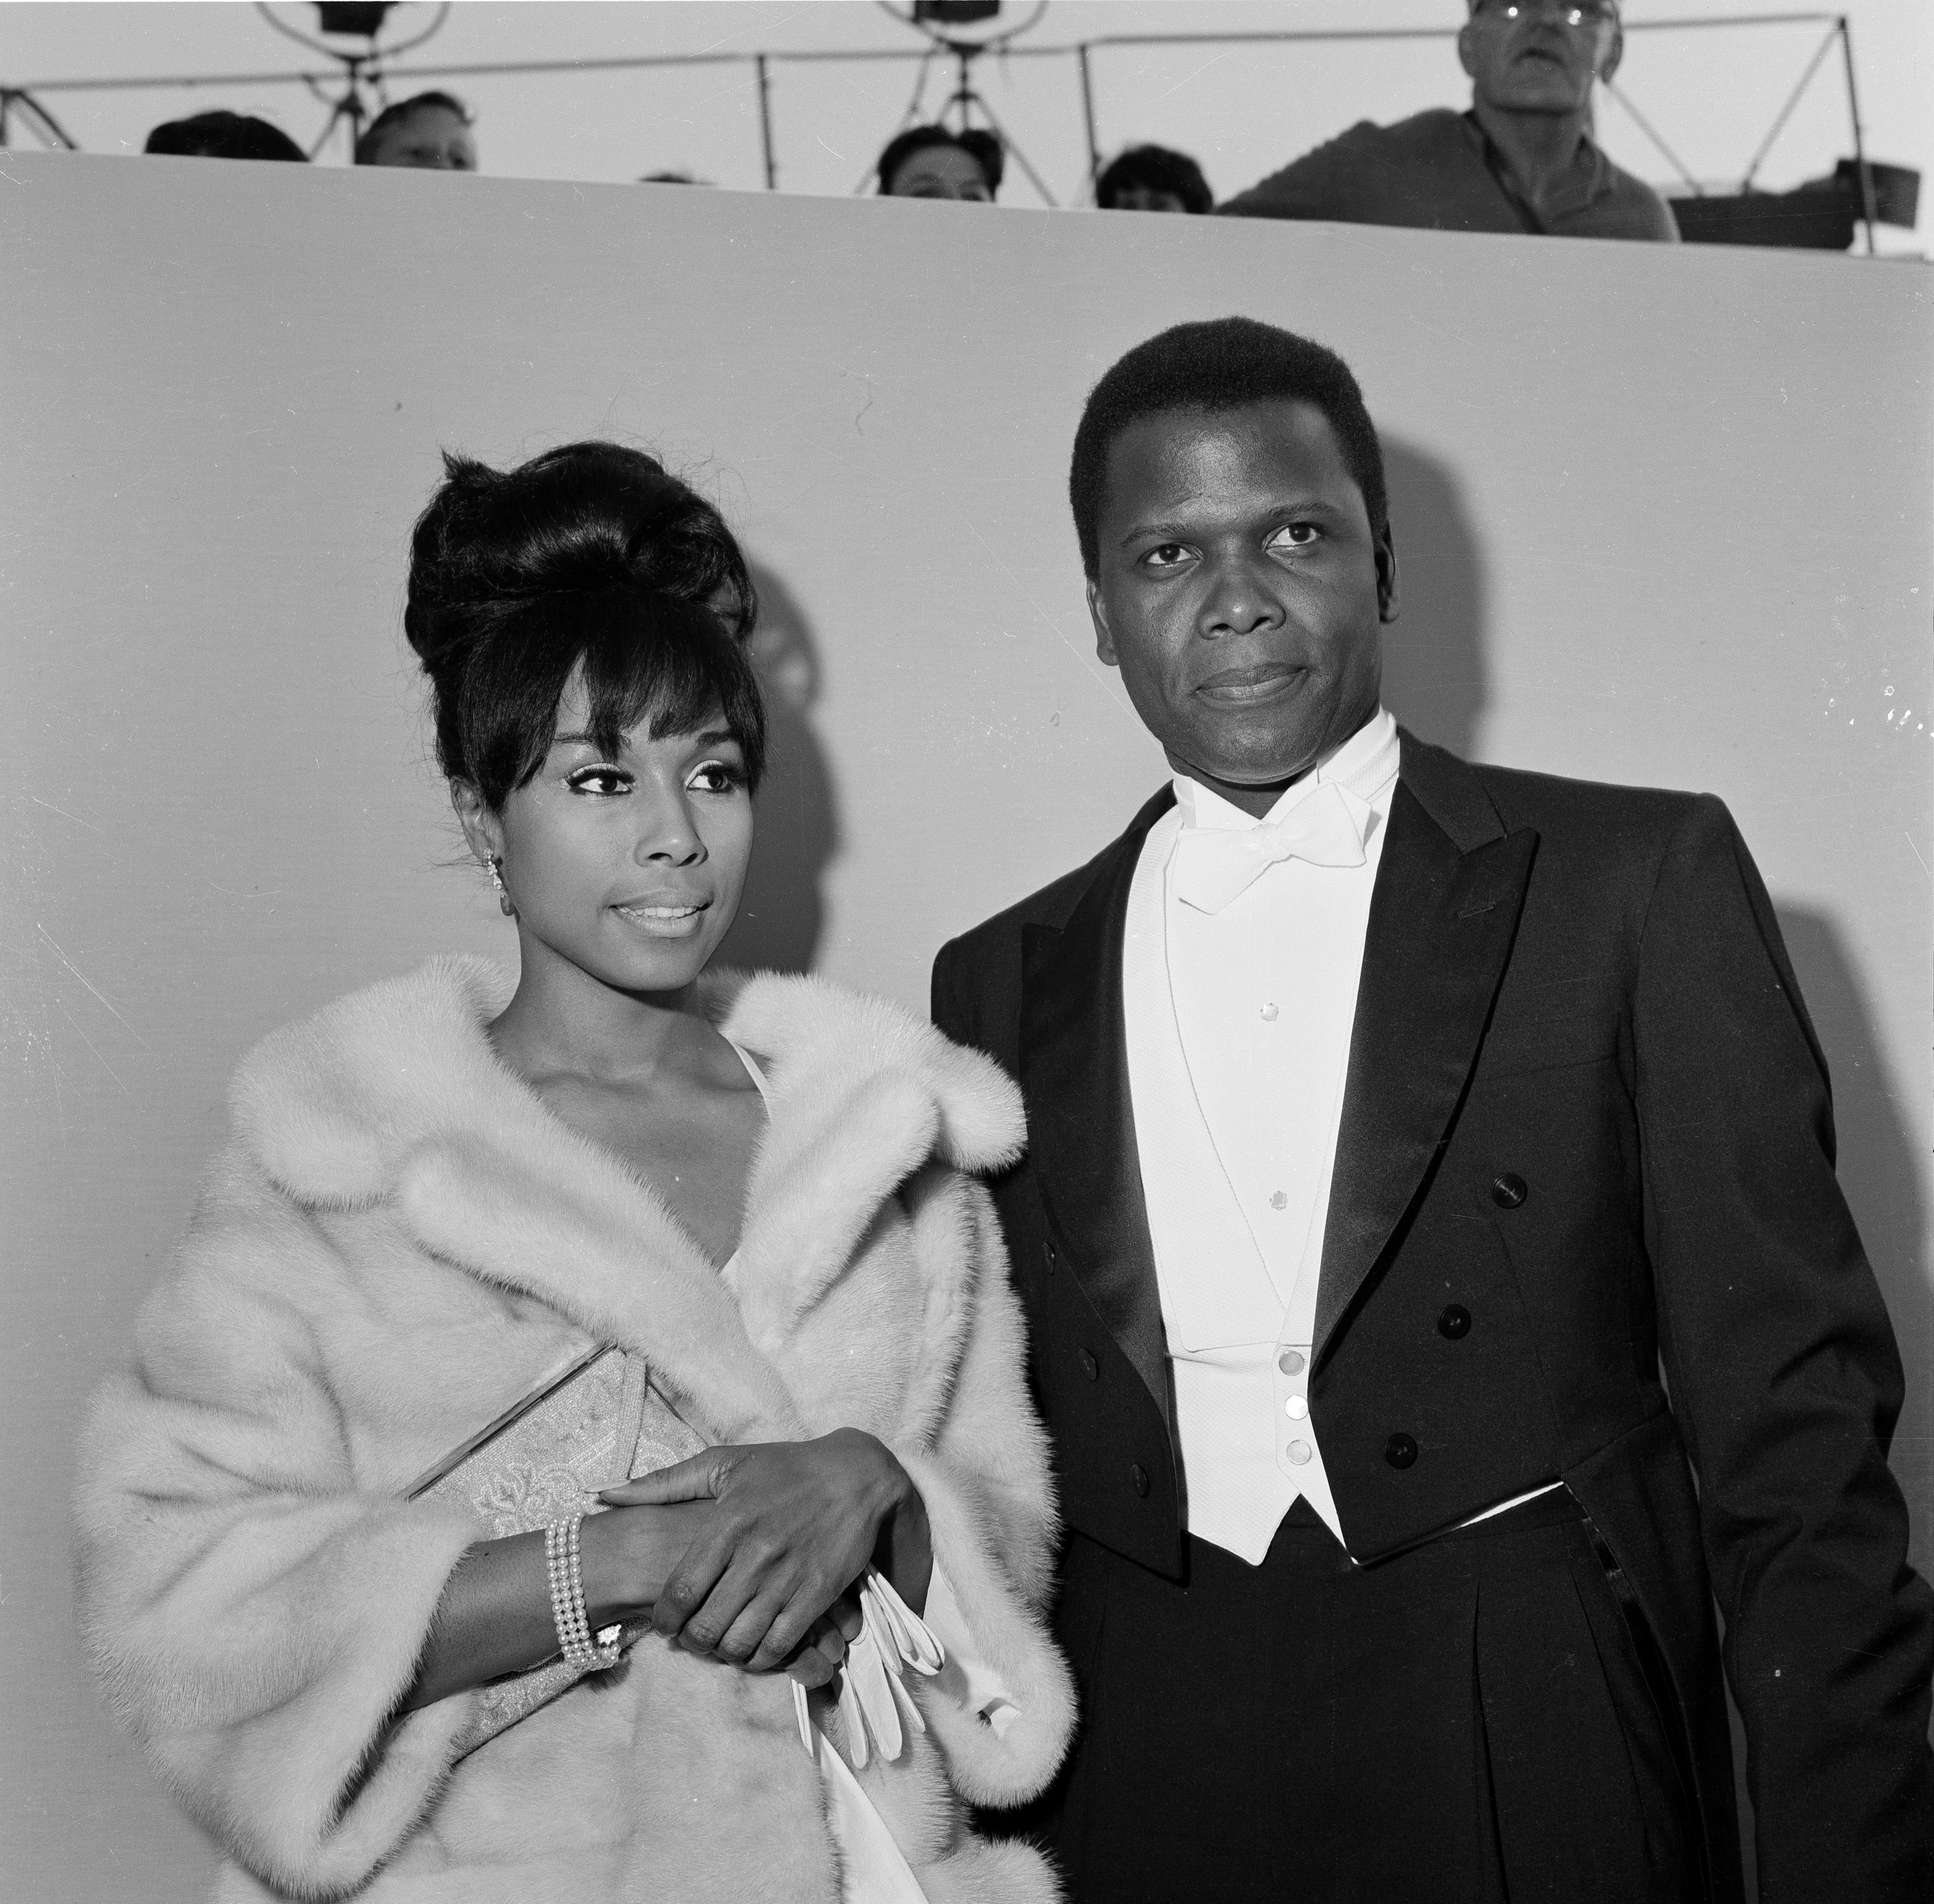 Sidney Poitier and Diahann Carroll during The 36th Academy Awards in Santa Monica,CA. | Source: Getty Images